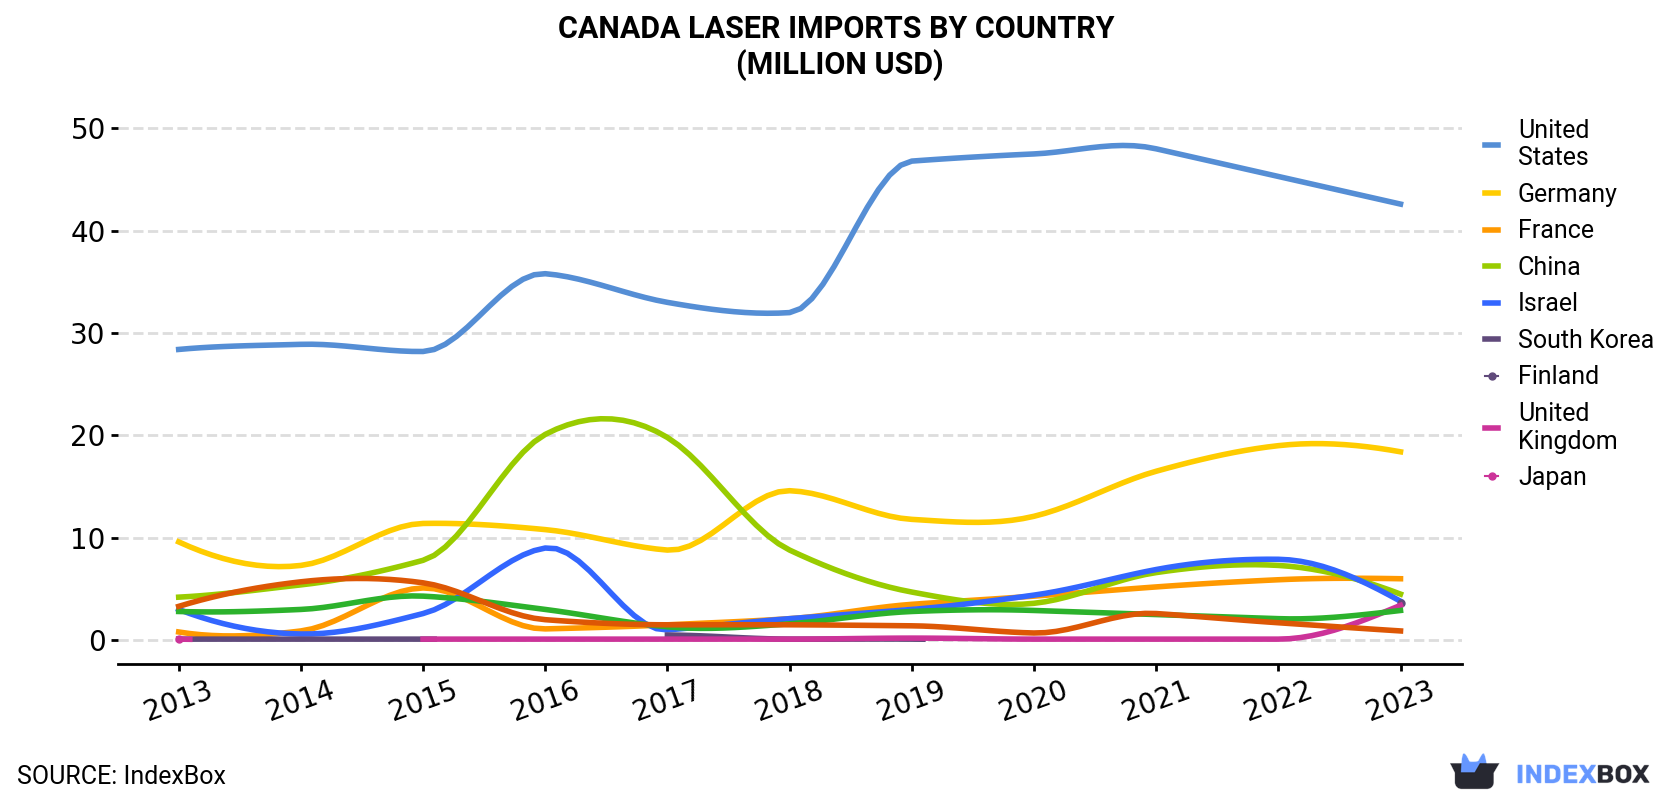 Canada Laser Imports By Country (Million USD)